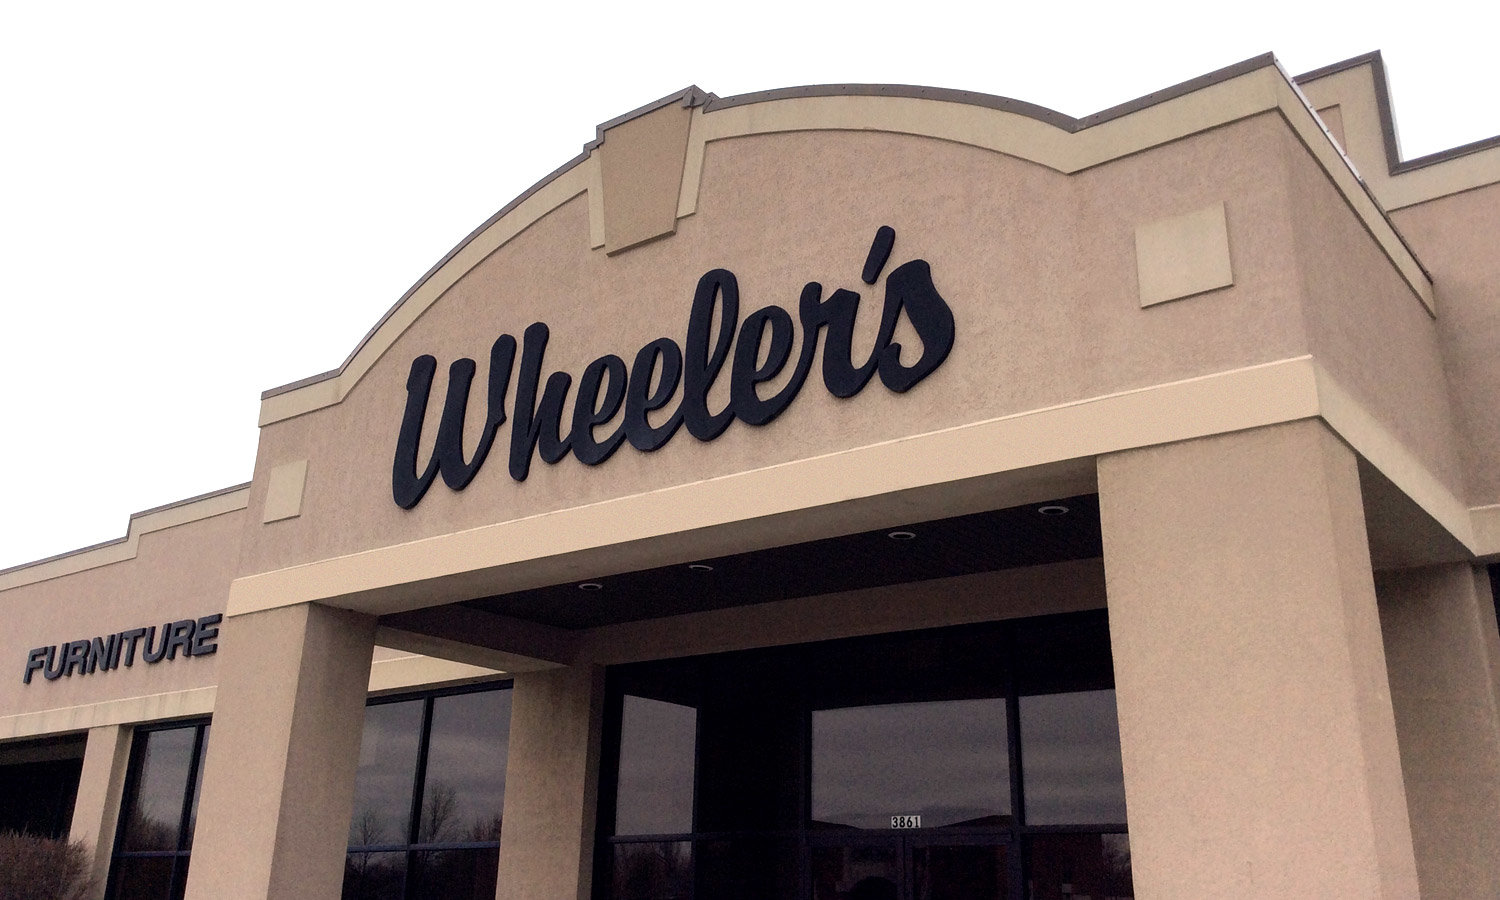 Wheeler's Furniture has been in business for nine decades.